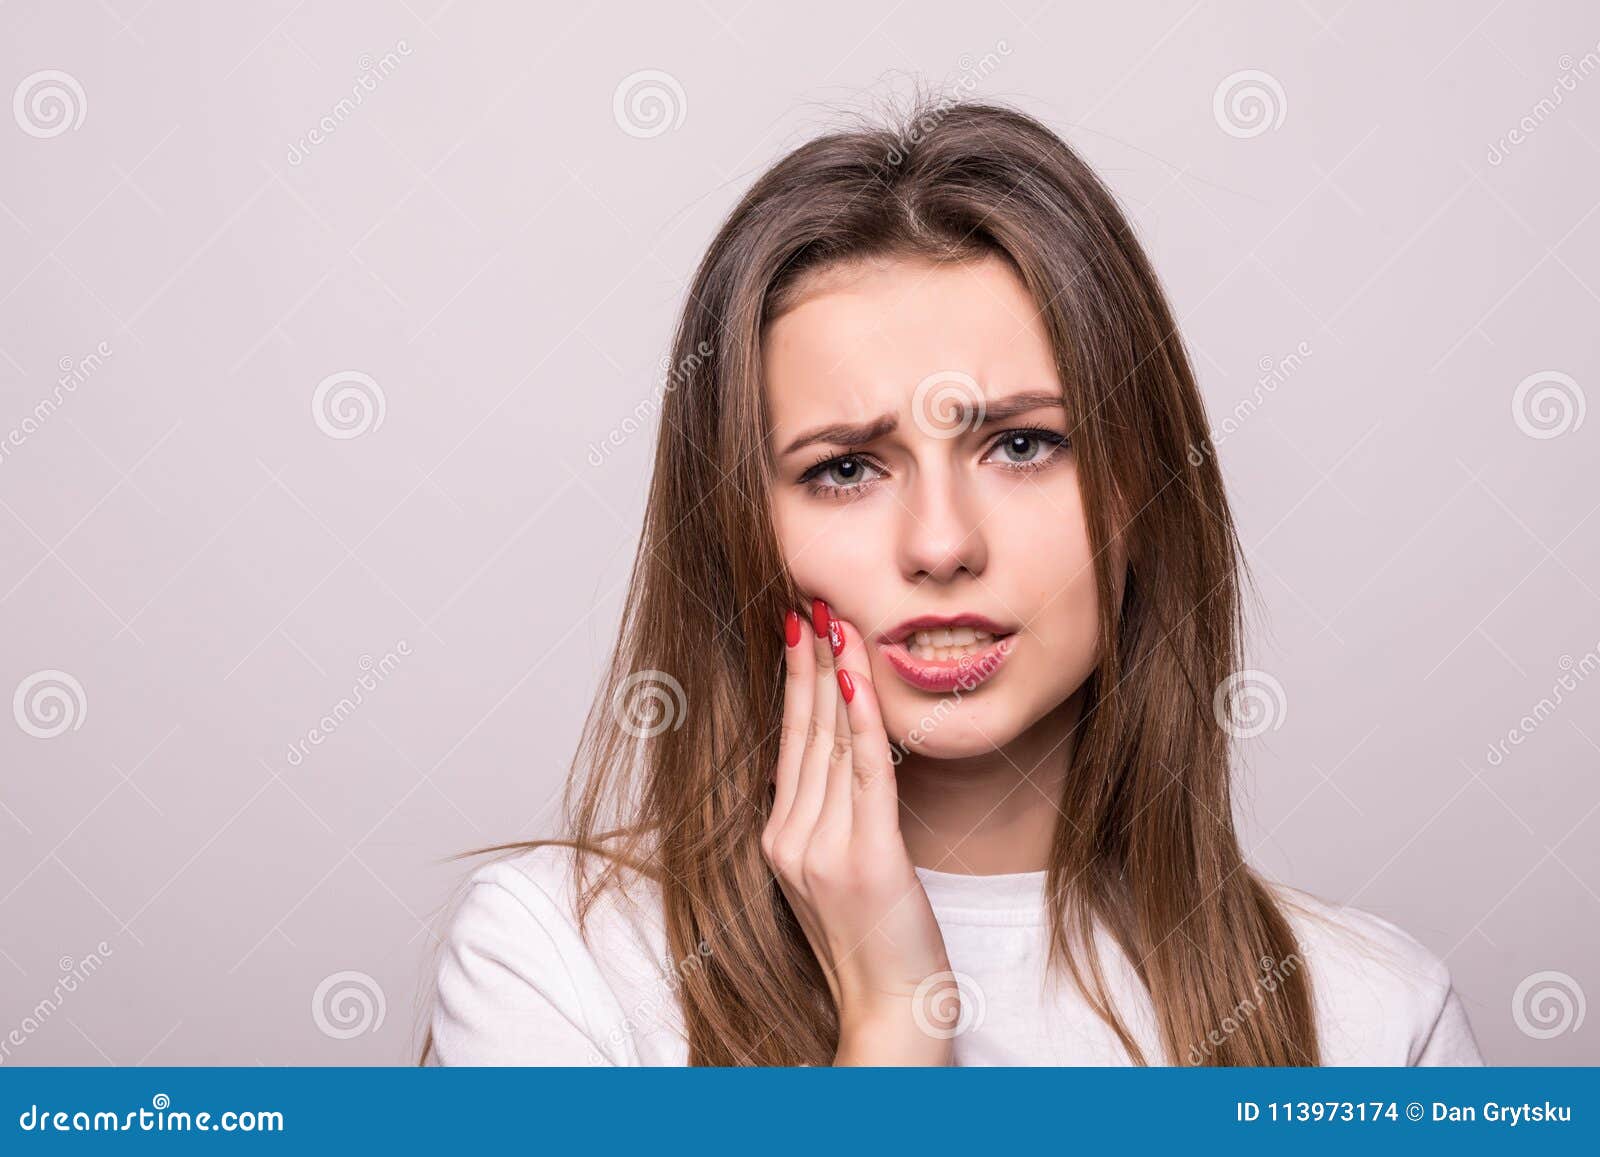 woman suffering from toothache, tooth decay or sensitivity  on gray